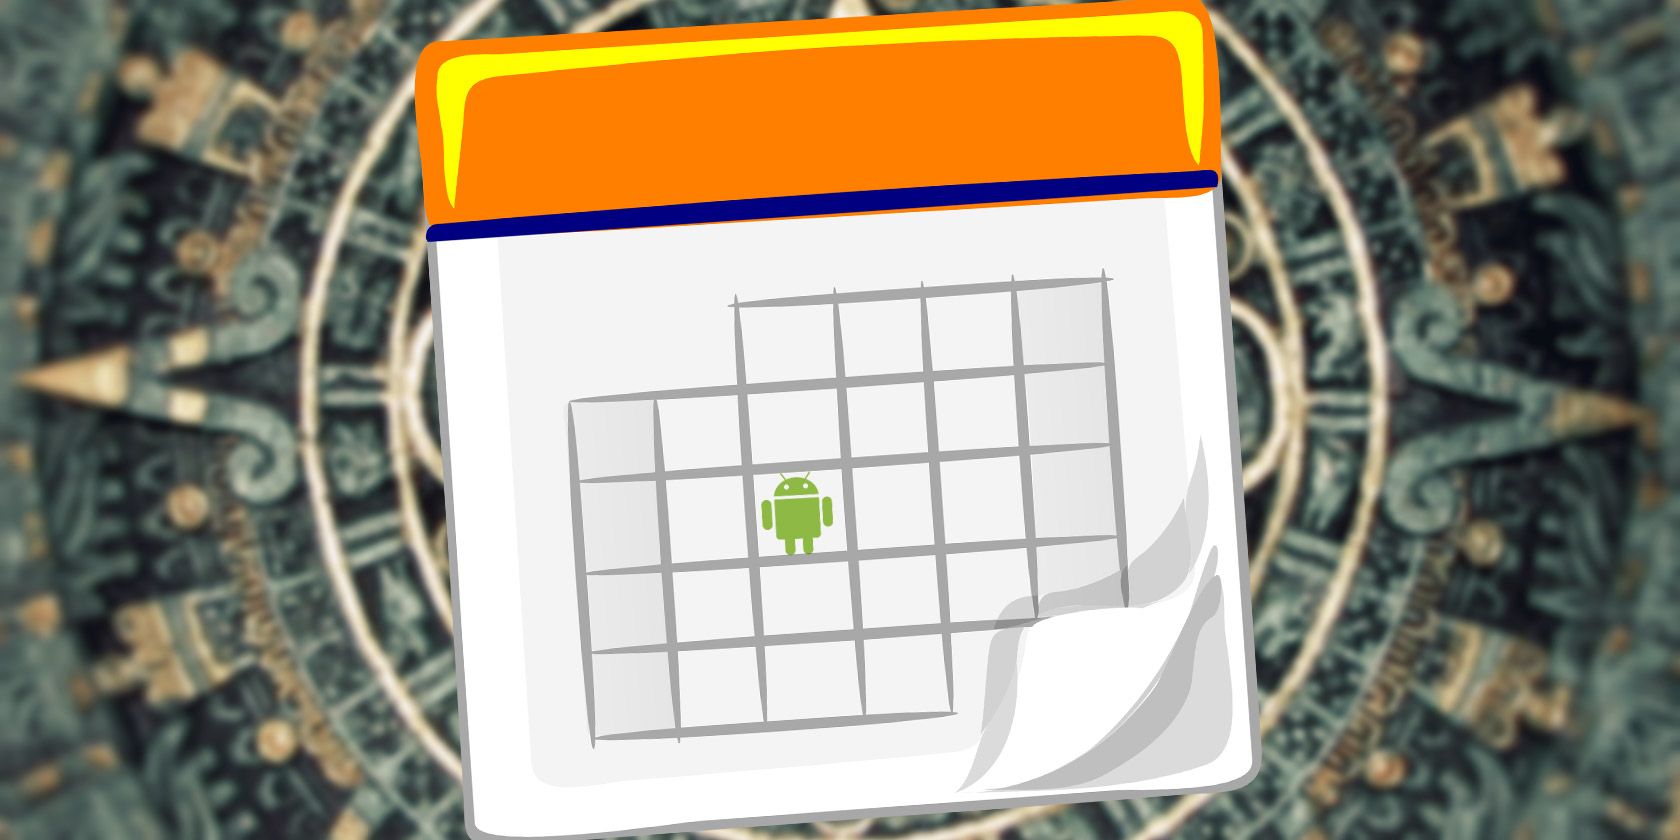 calendar app for android icon generator